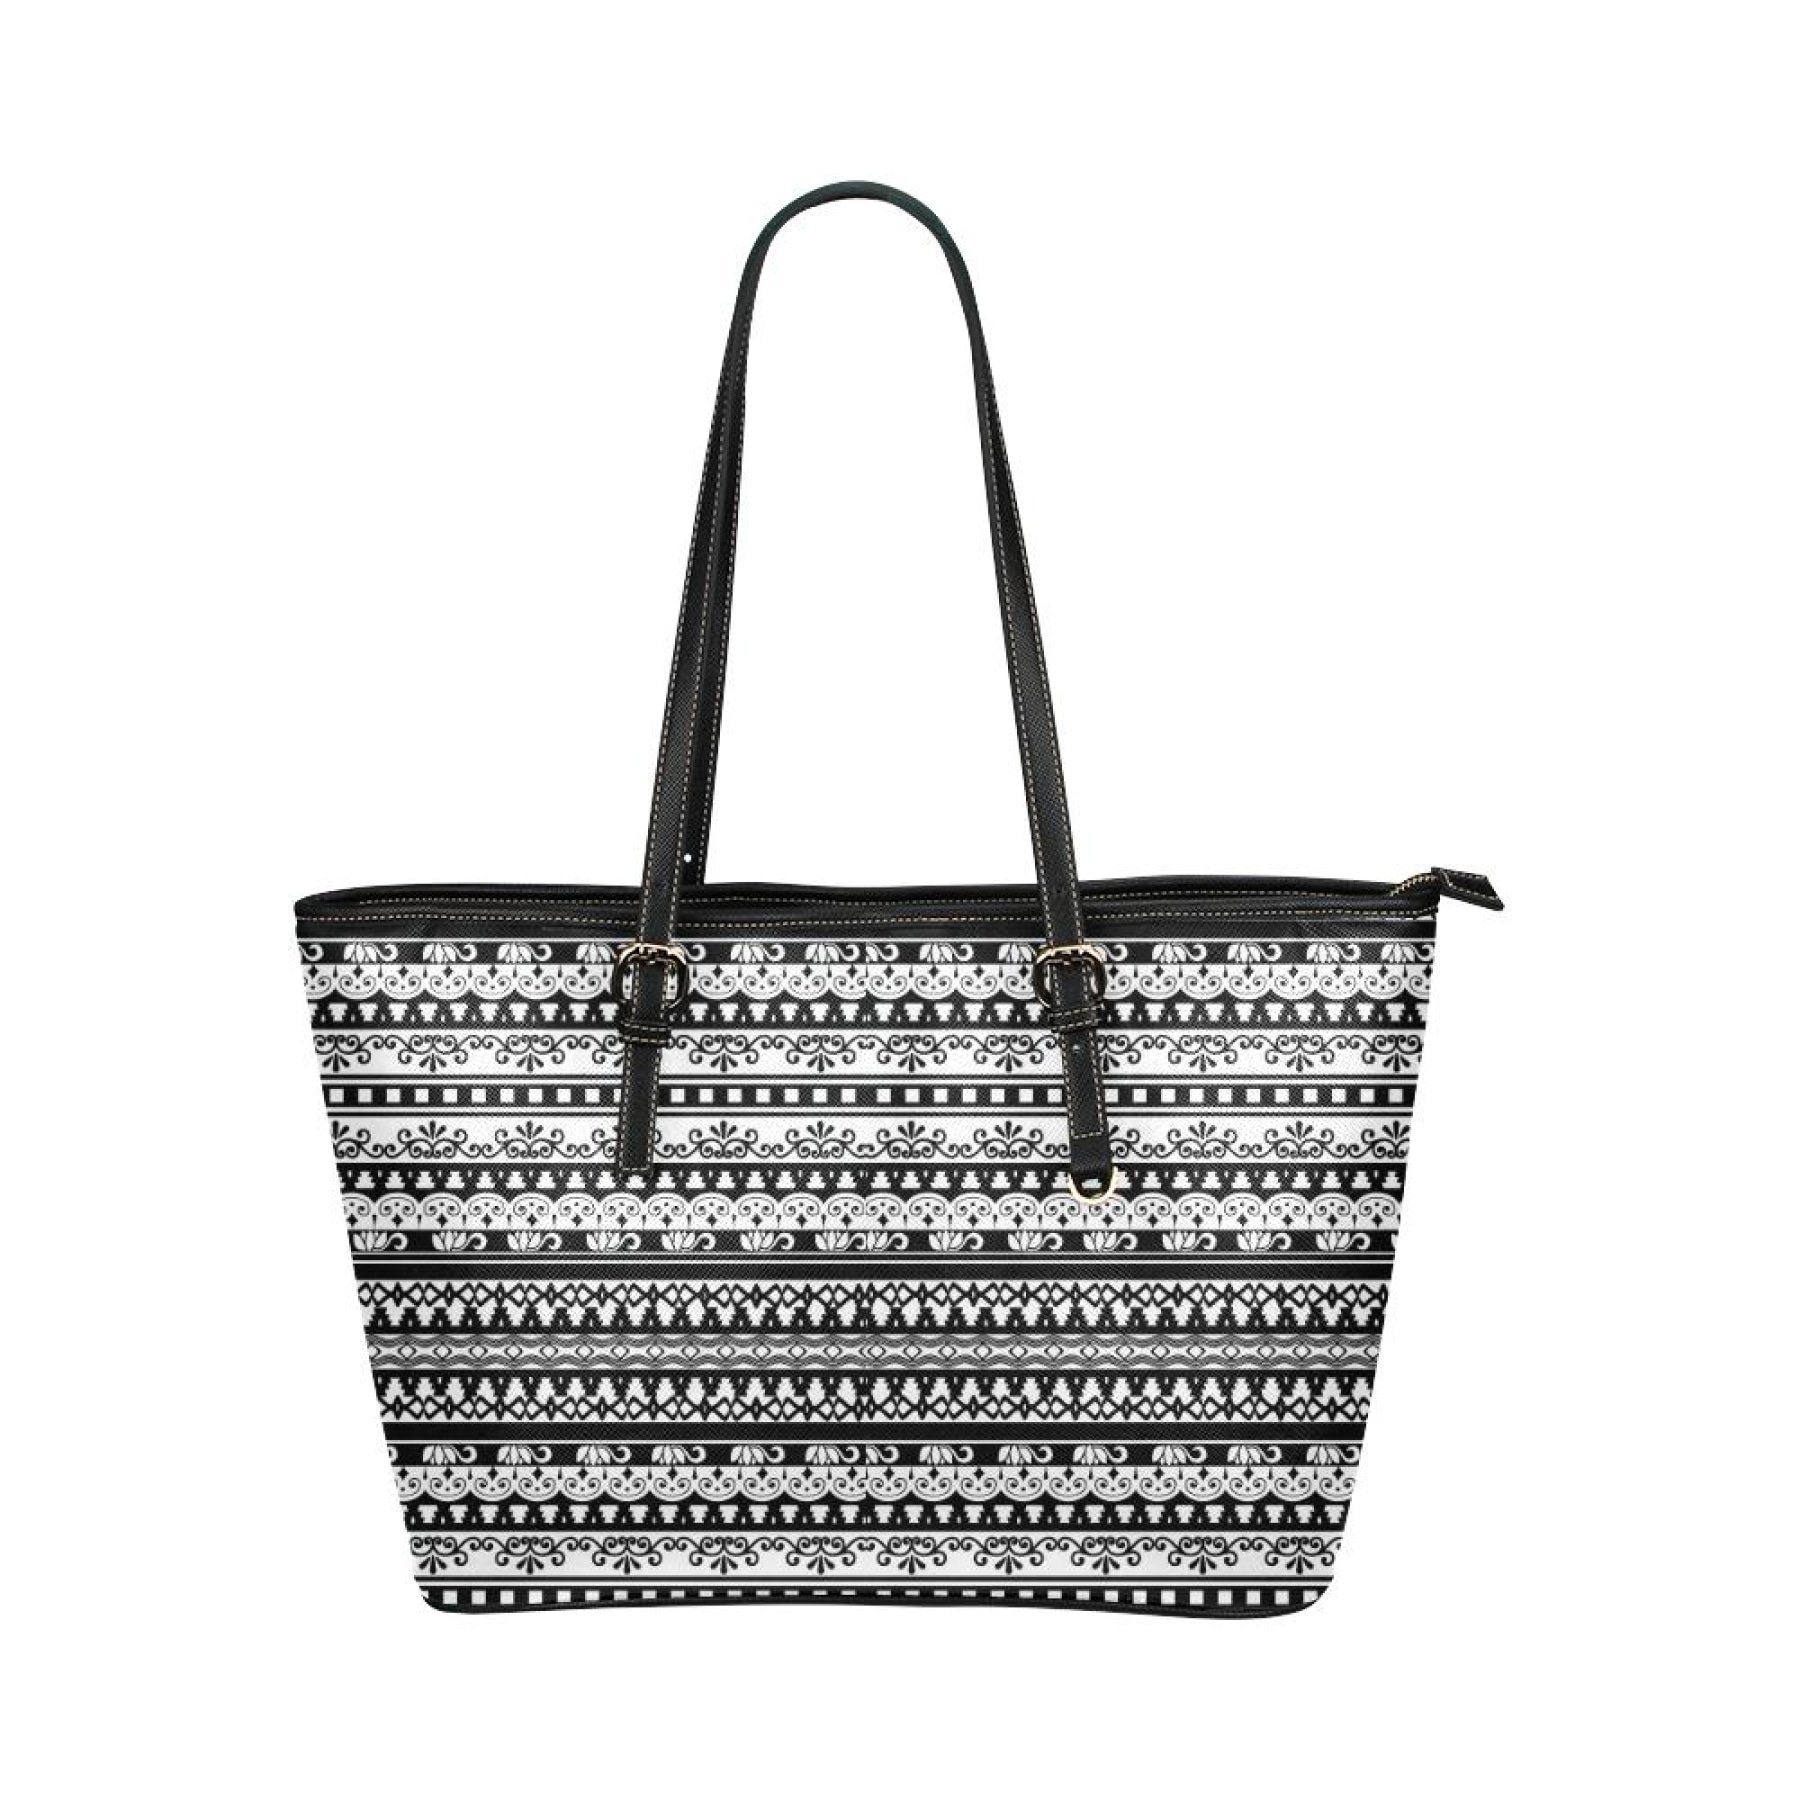 Black And White Vintage Style Leather Tote Bag 10